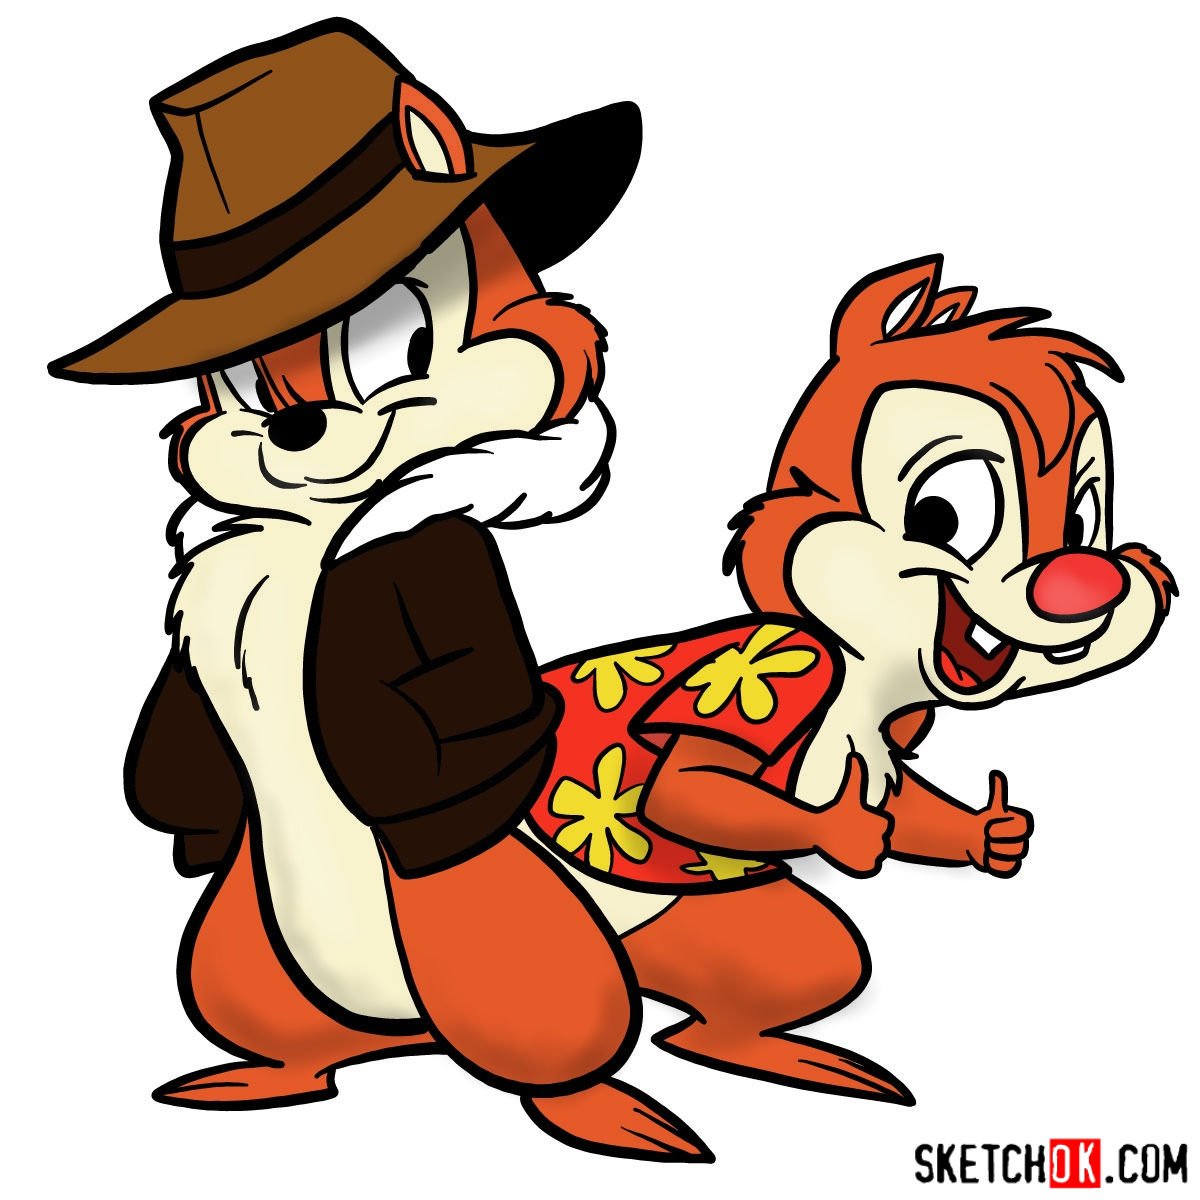 How to draw Chip and Dale together